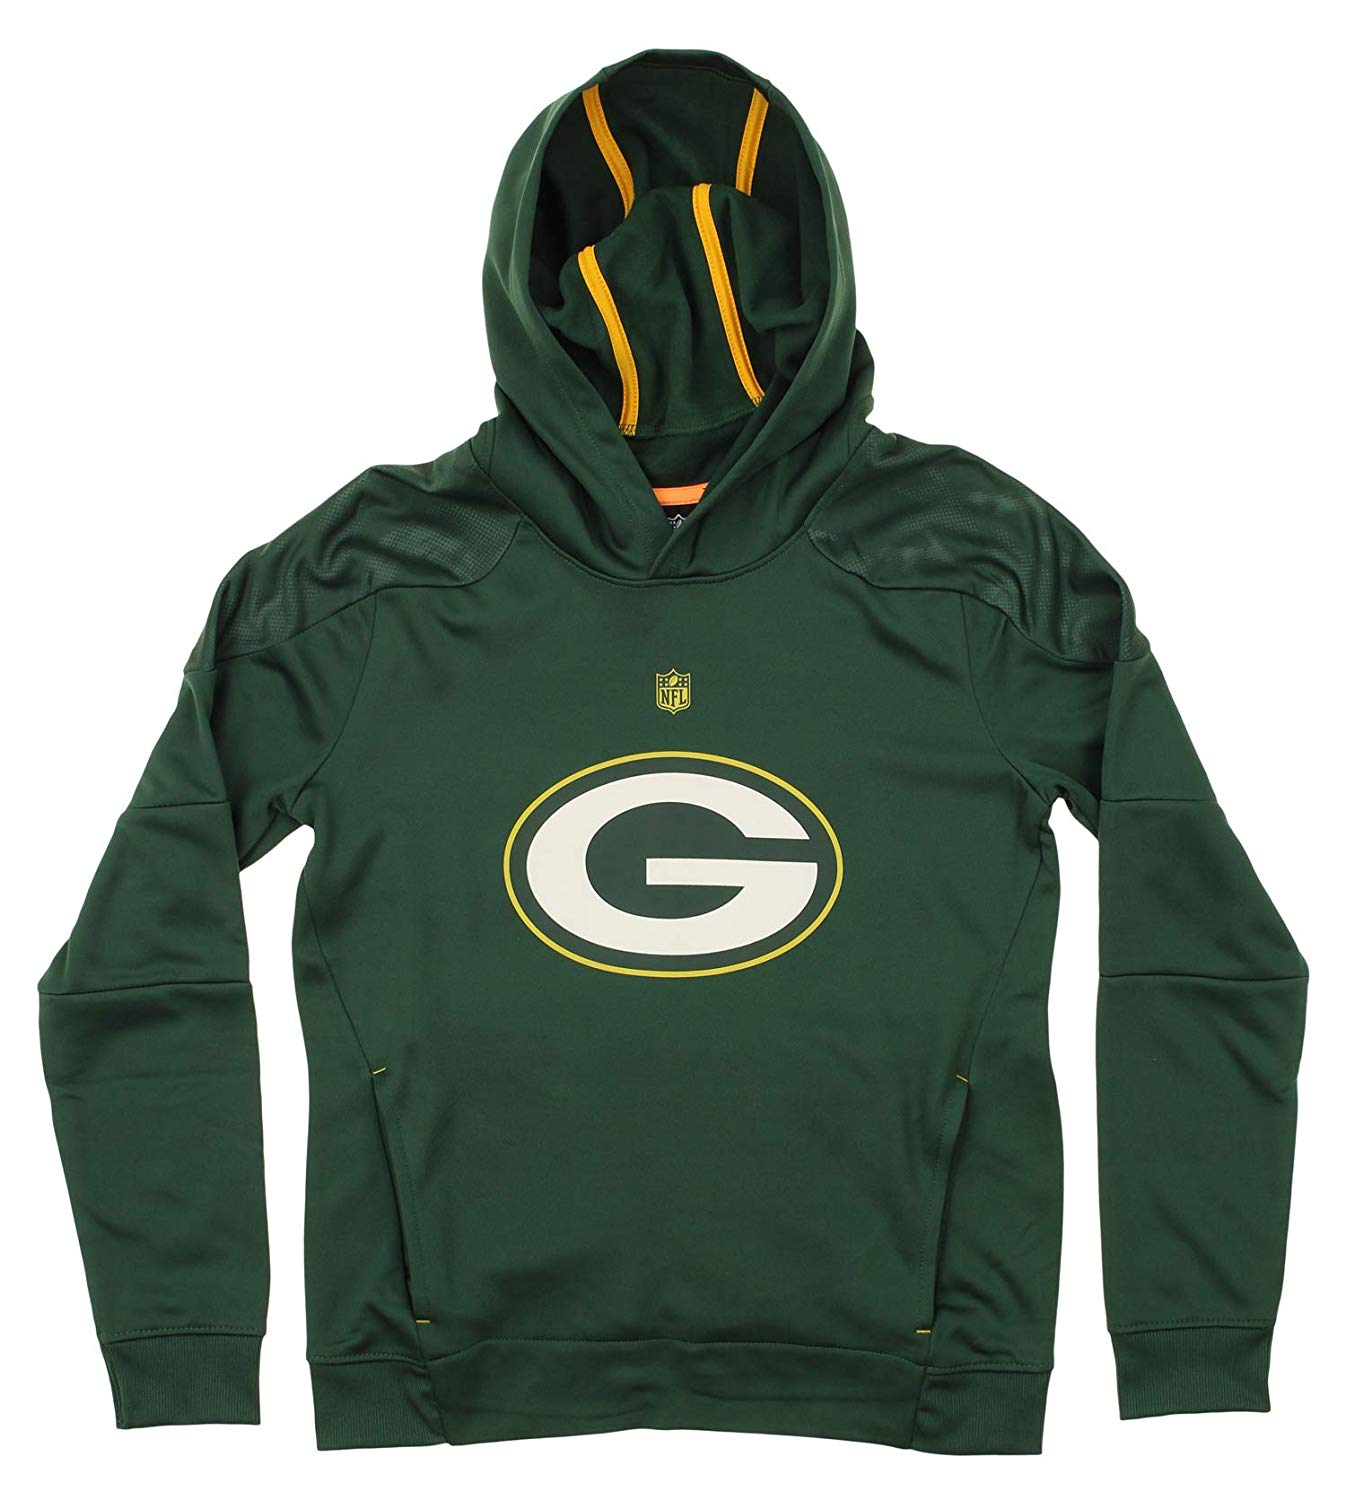 Outerstuff NFL Youth Green Bay Packers Mach Pullover Hoodie, Green | eBay